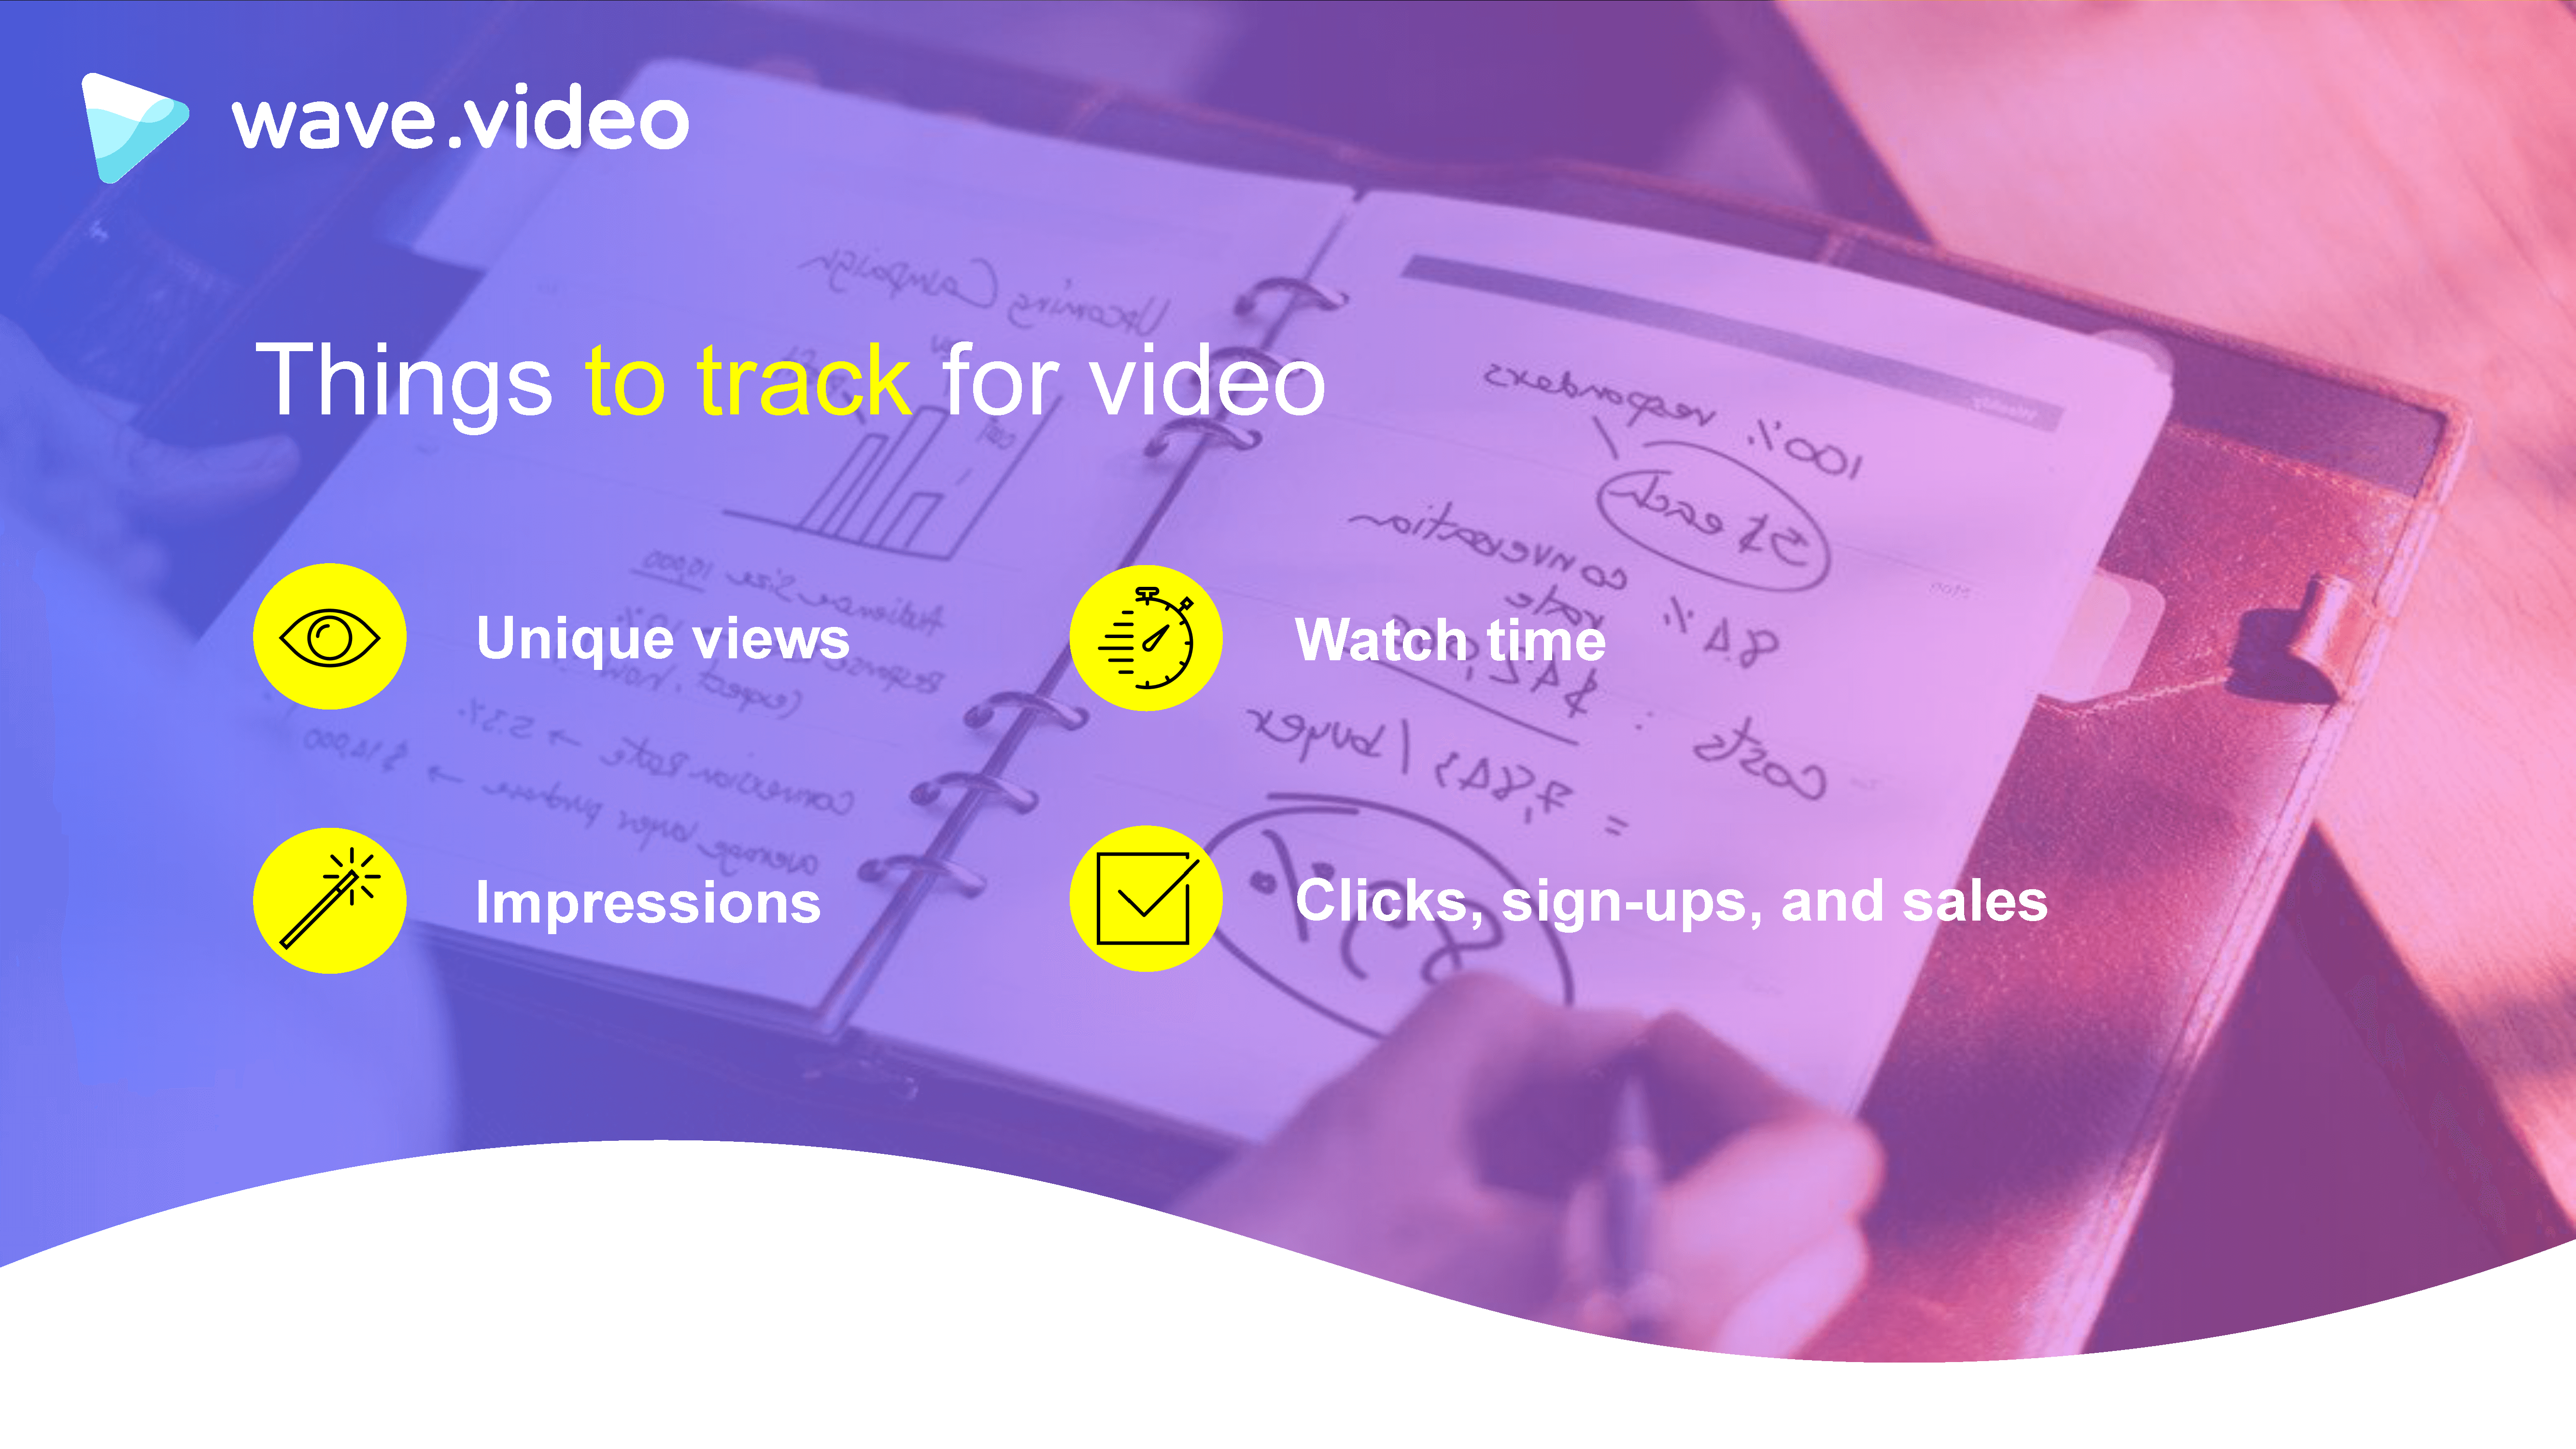 KPIs for video